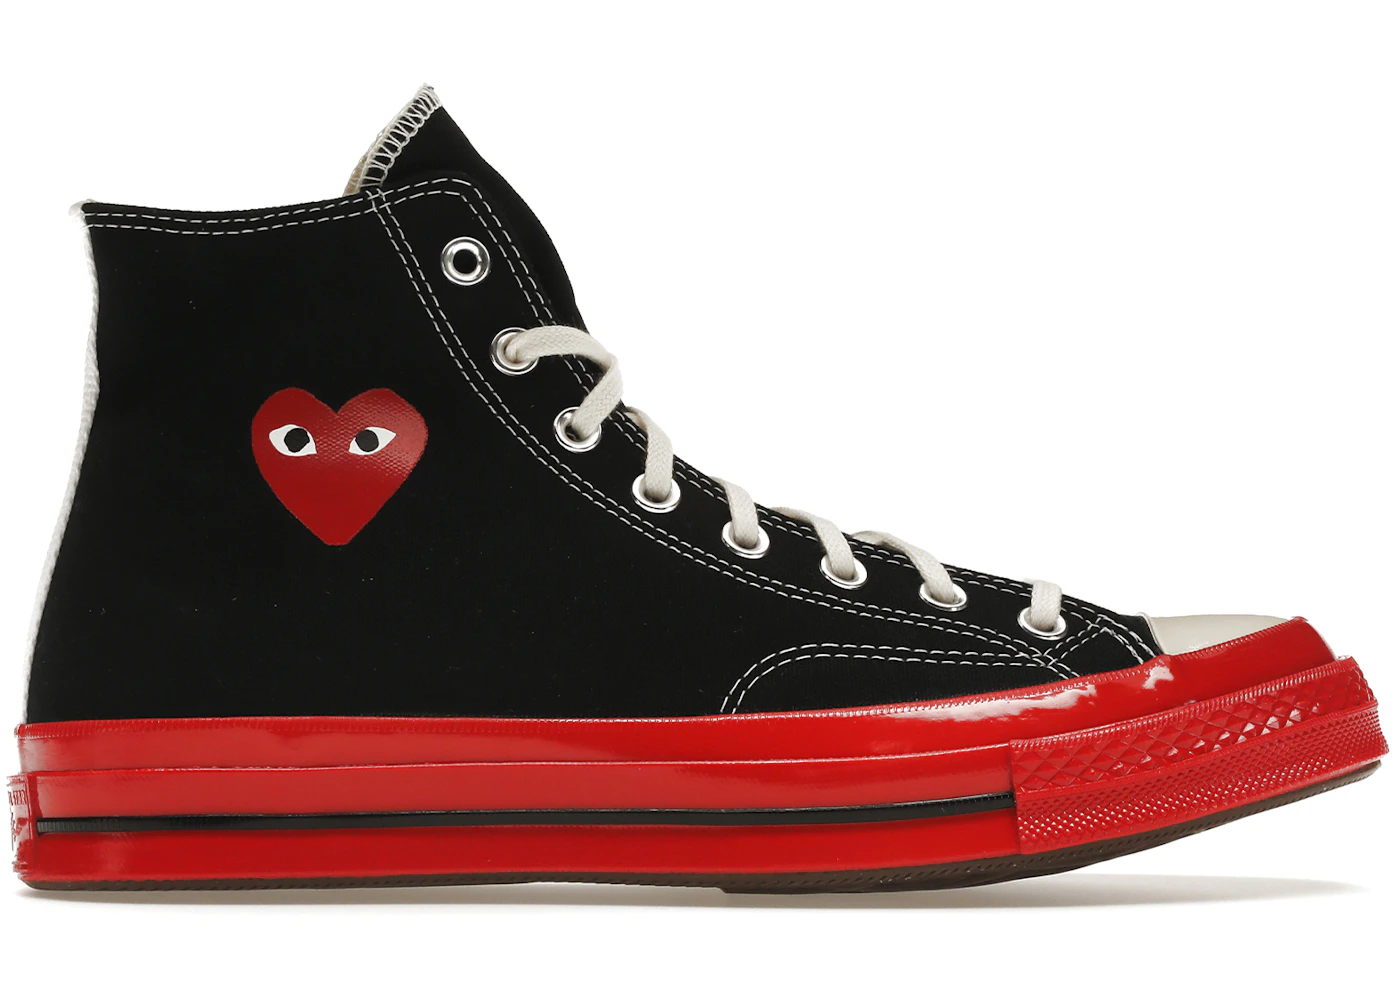 Chuck Taylor All-Star 70 Hi Comme des Garcons PLAY Black Red Midsole - A01793C - US